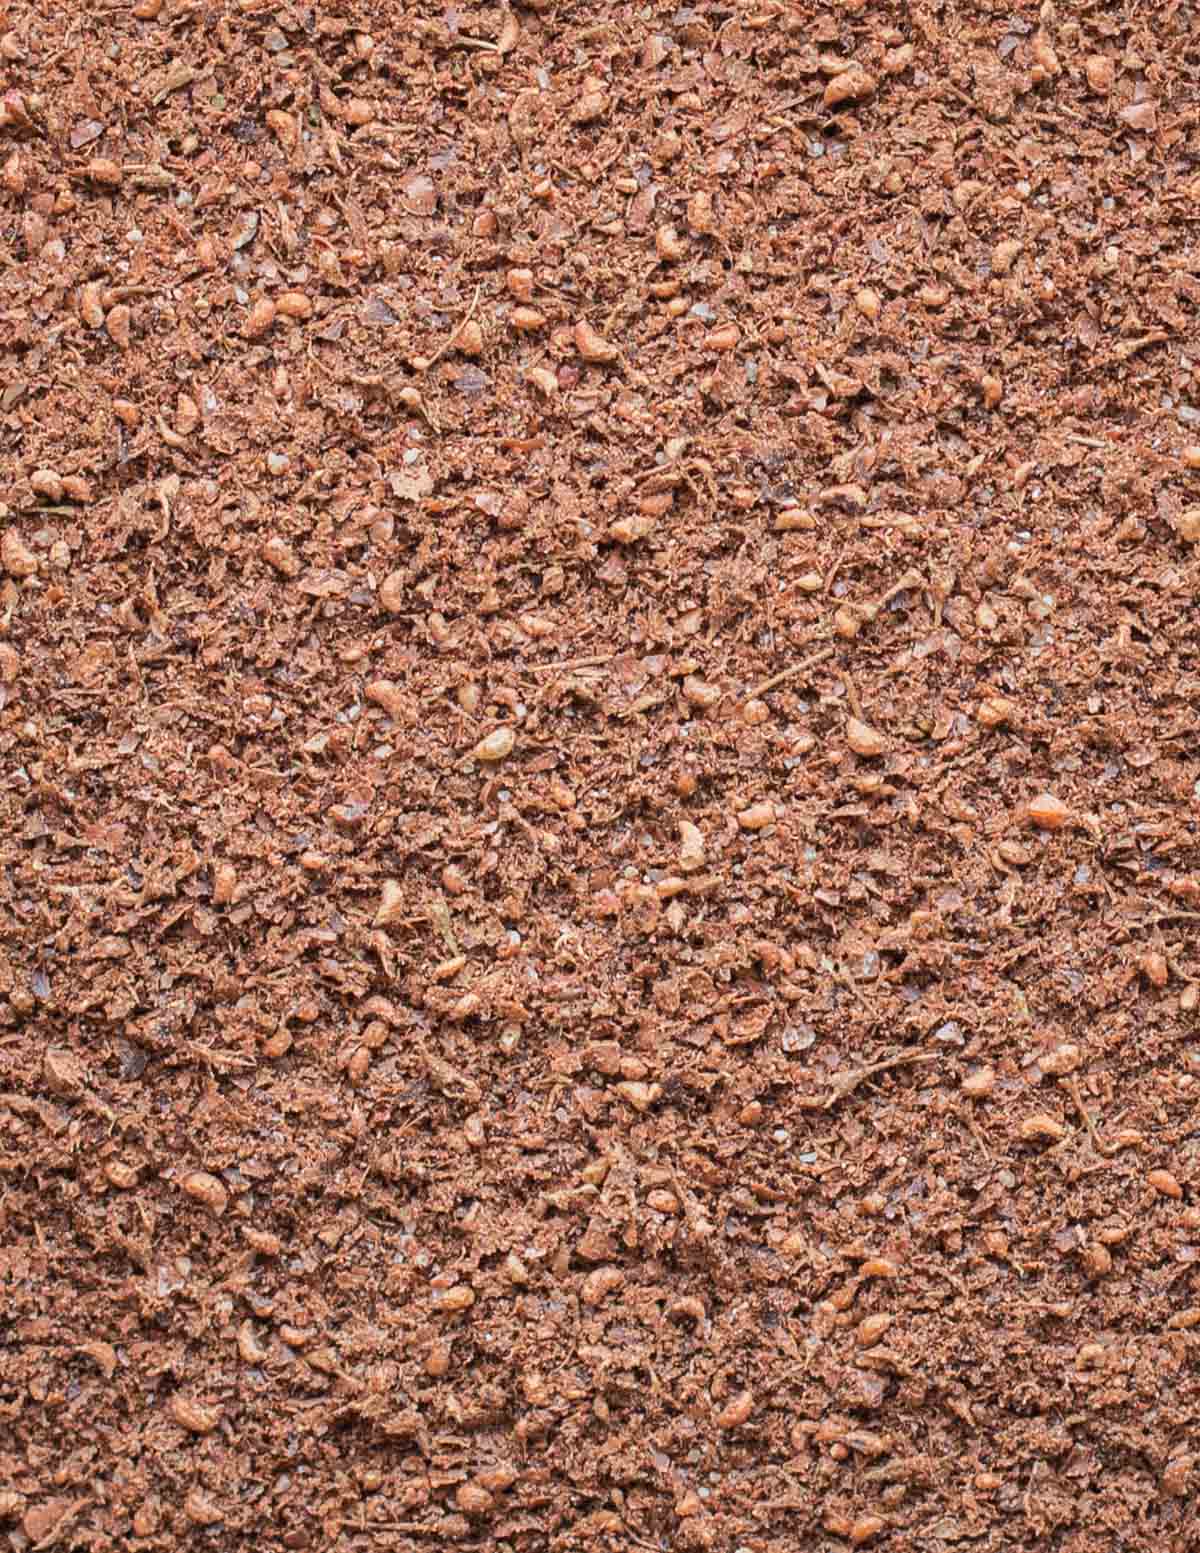 A close up image of dock seed flour. 